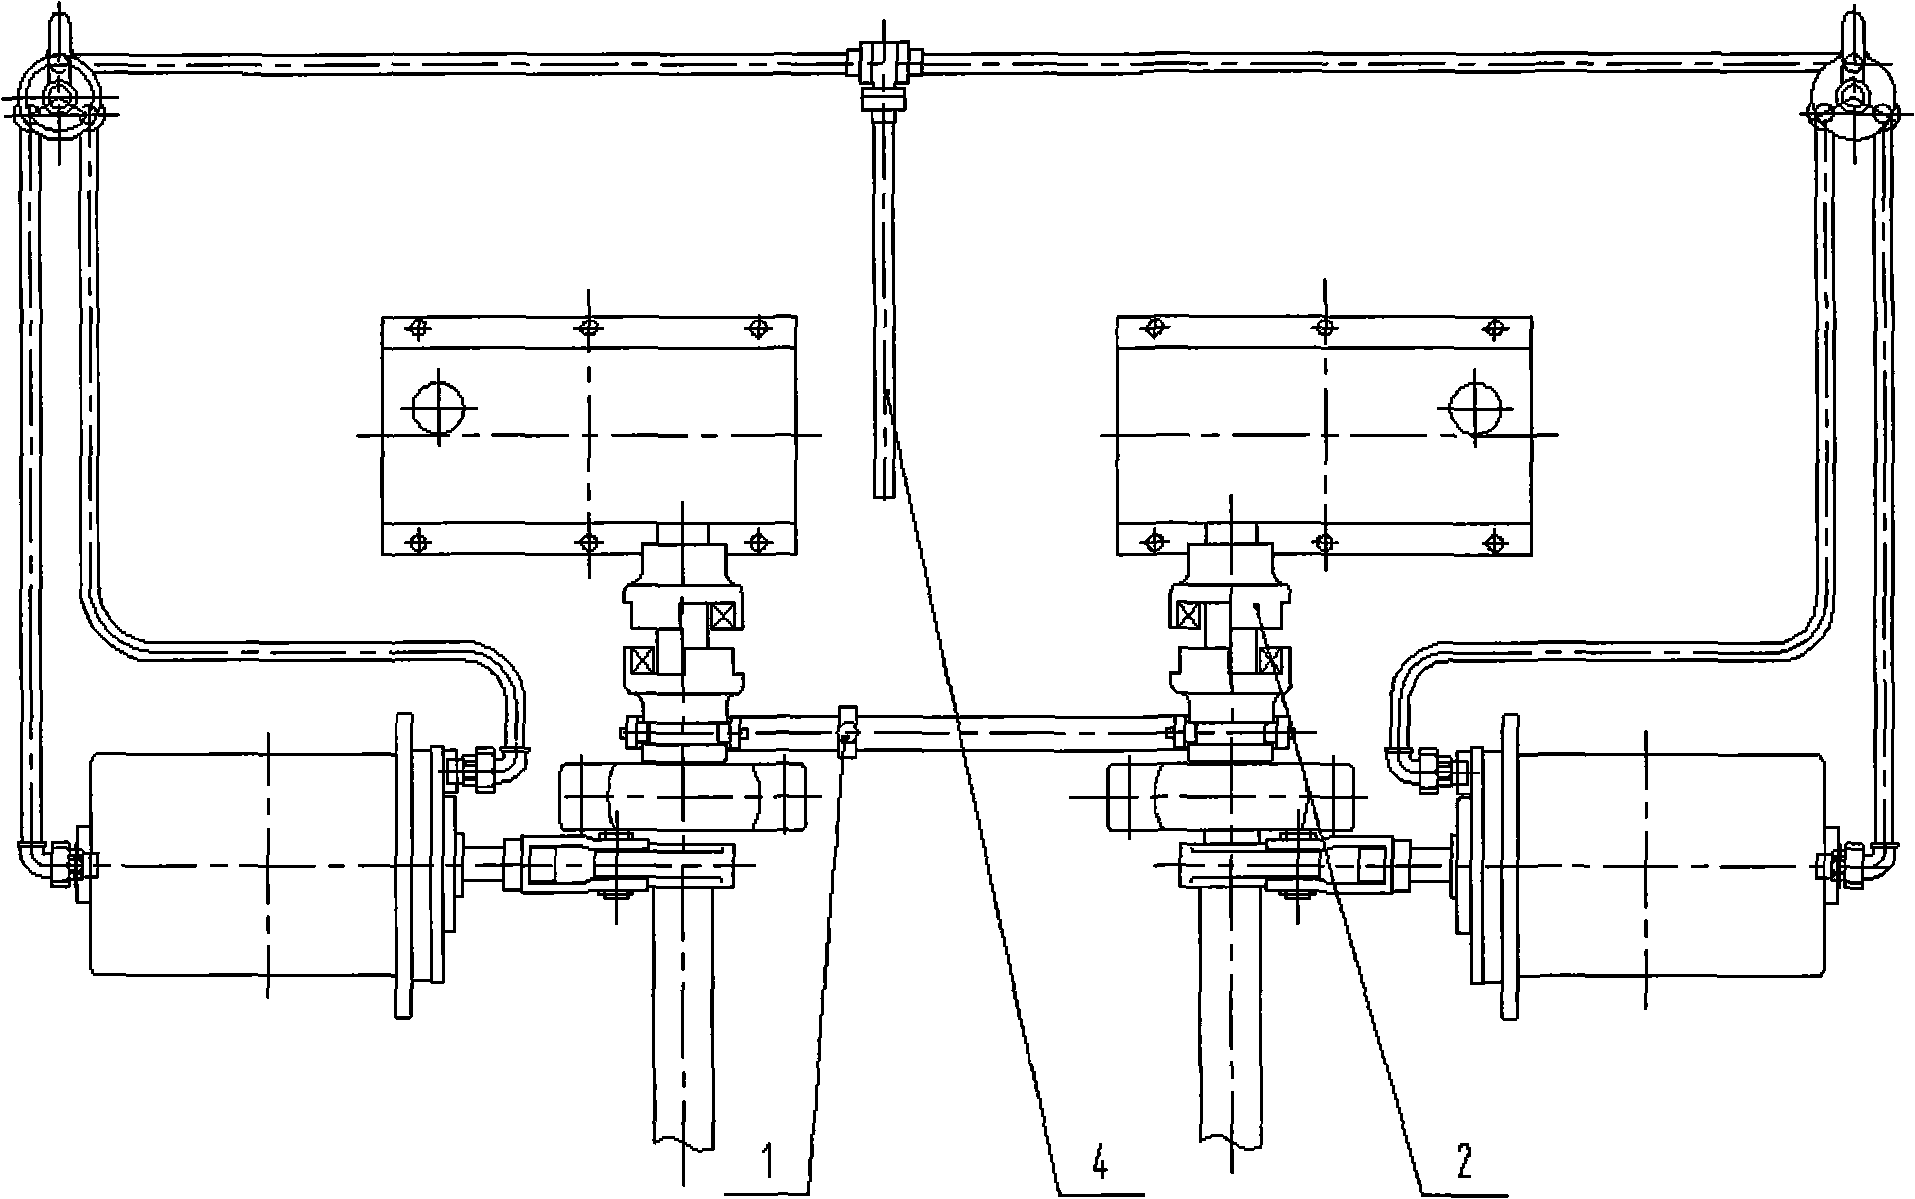 Wind power/manual linkage apparatus for discharge of railway freight transport hopper wagon